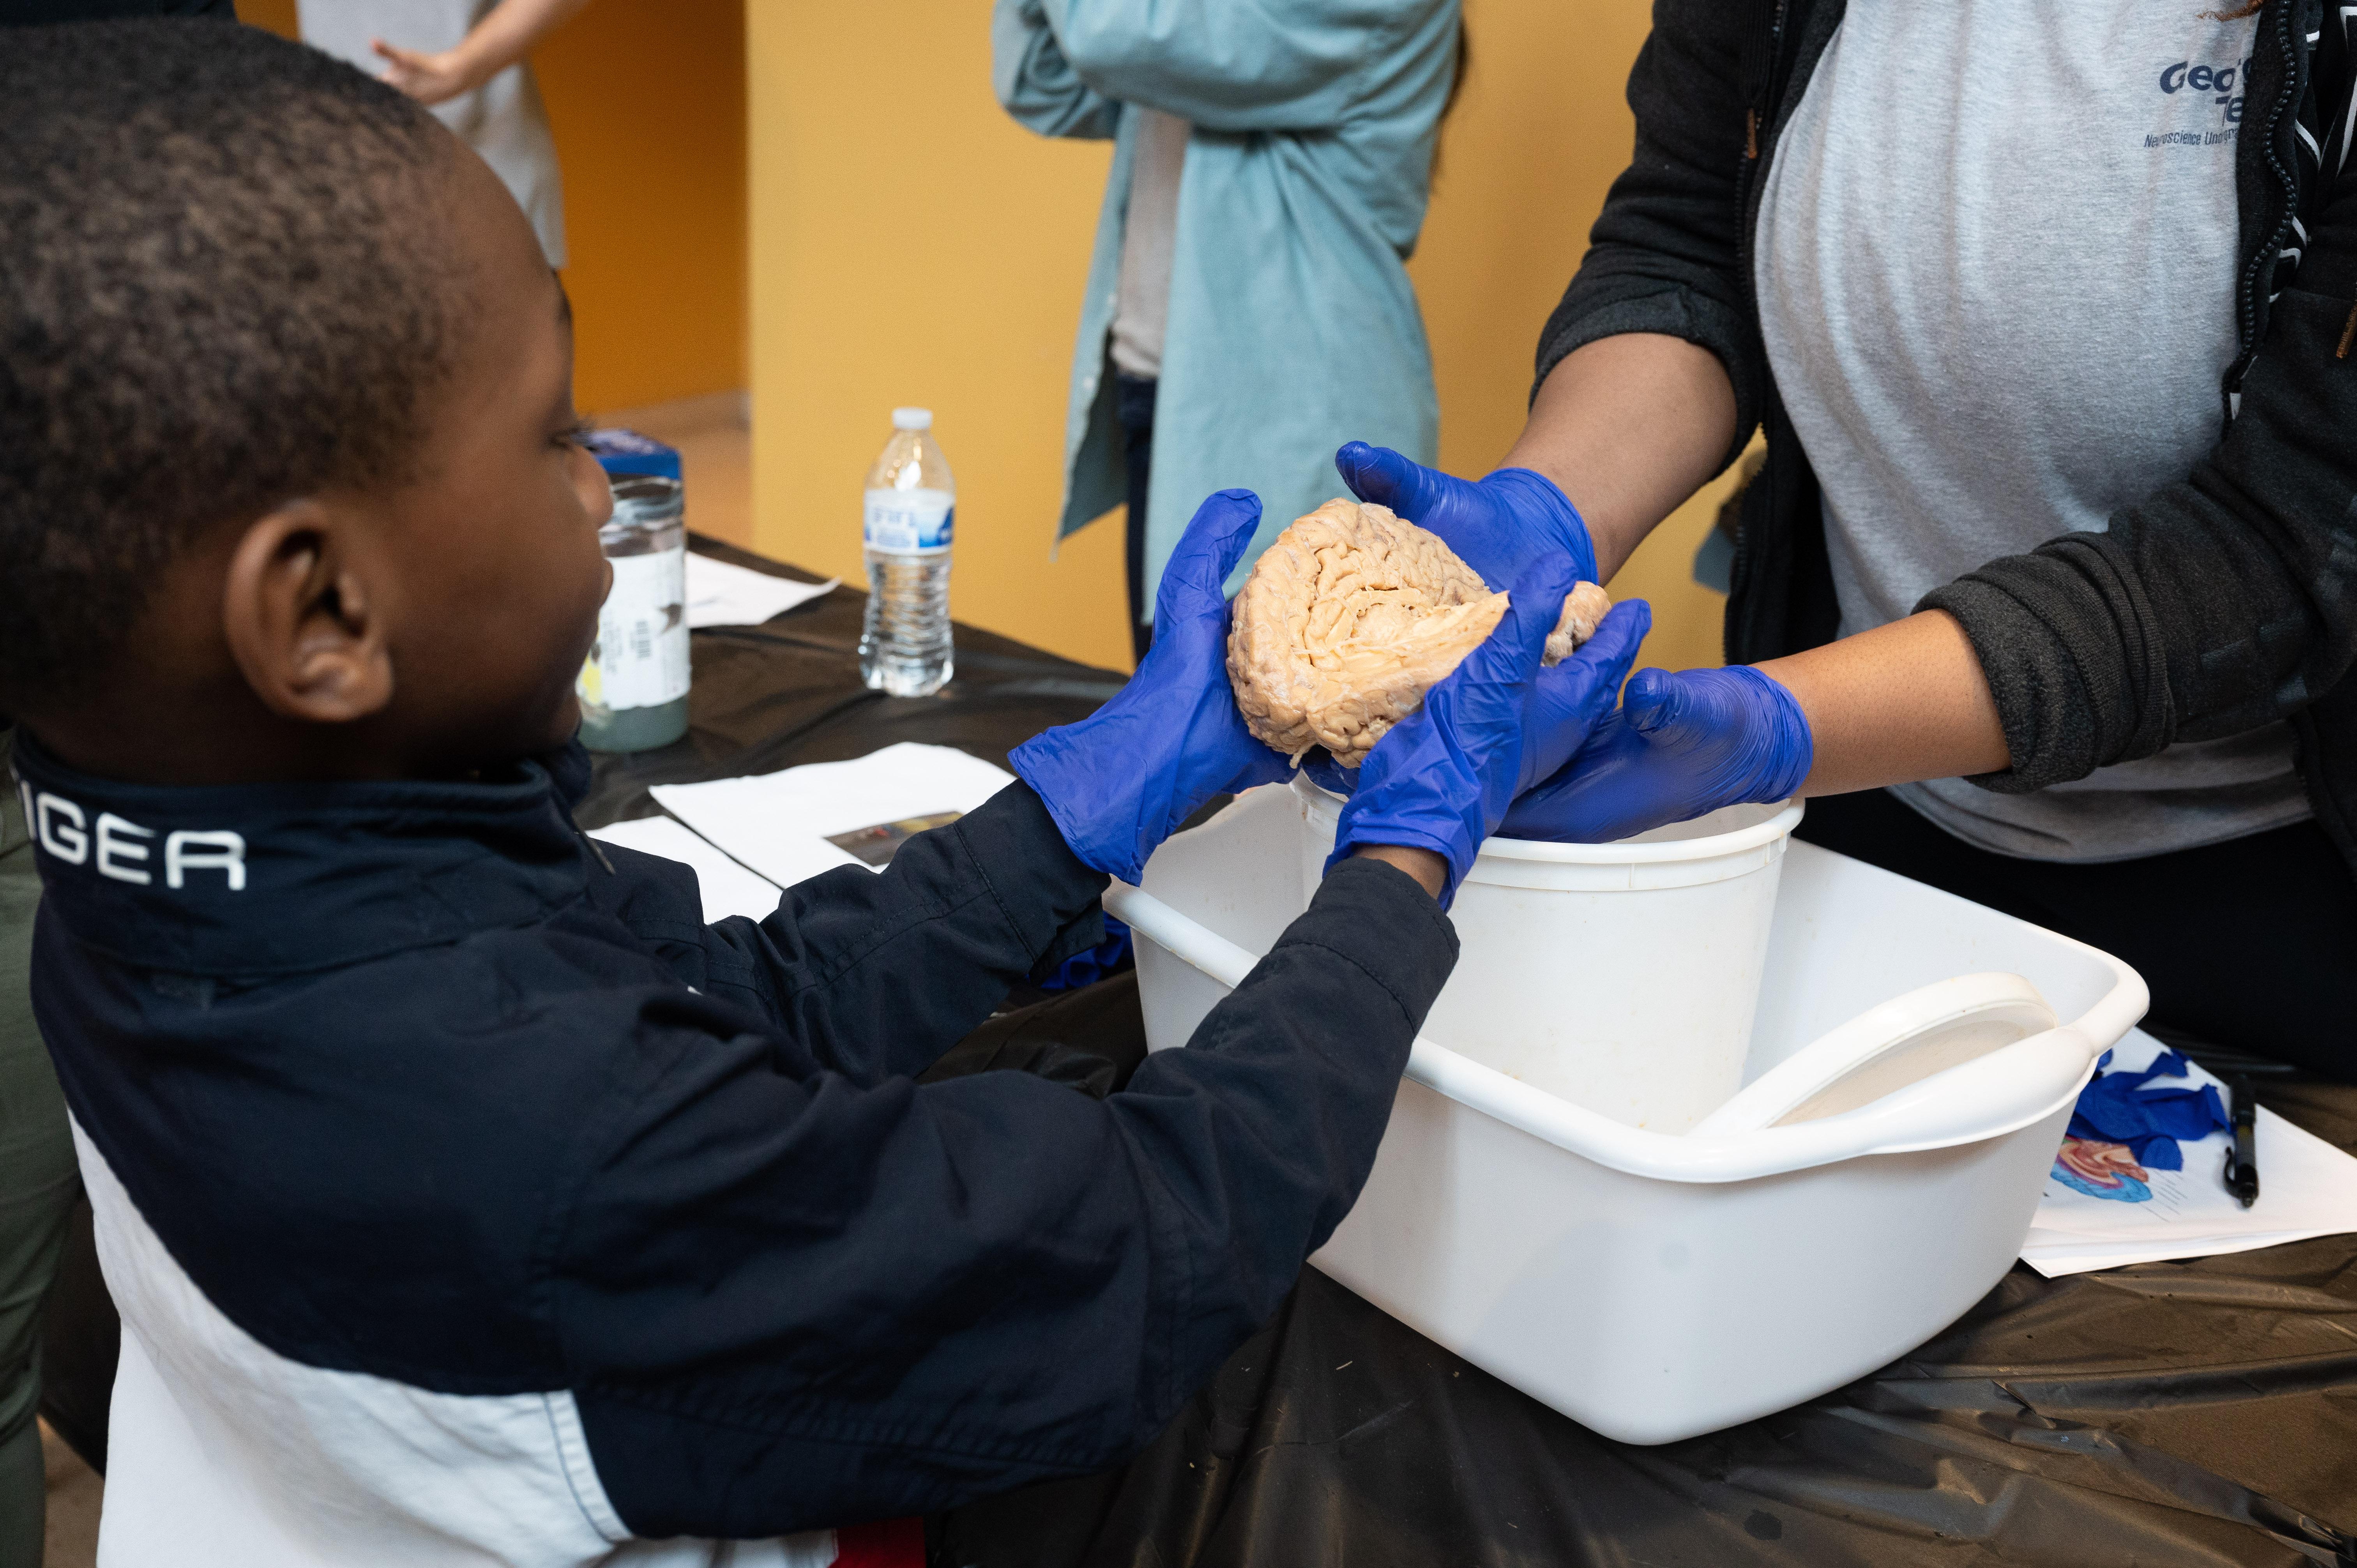 A young boy wearing blue latex gloves holds a human brain